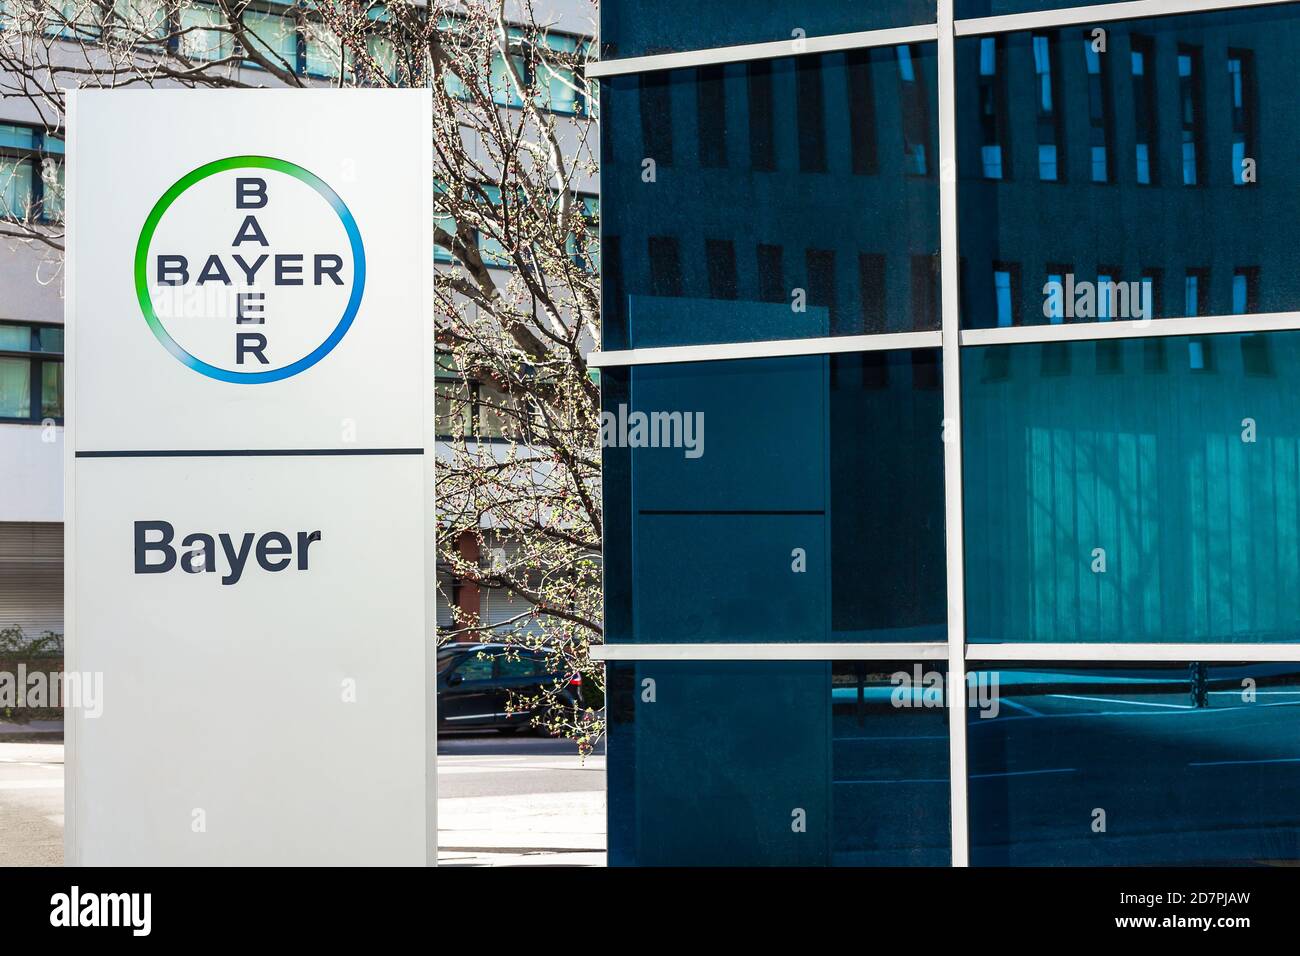 Bayer AG, German multinational pharmaceutical and life sciences company, one of largest pharmaceutical companies in world brand, logo on its office bu Stock Photo